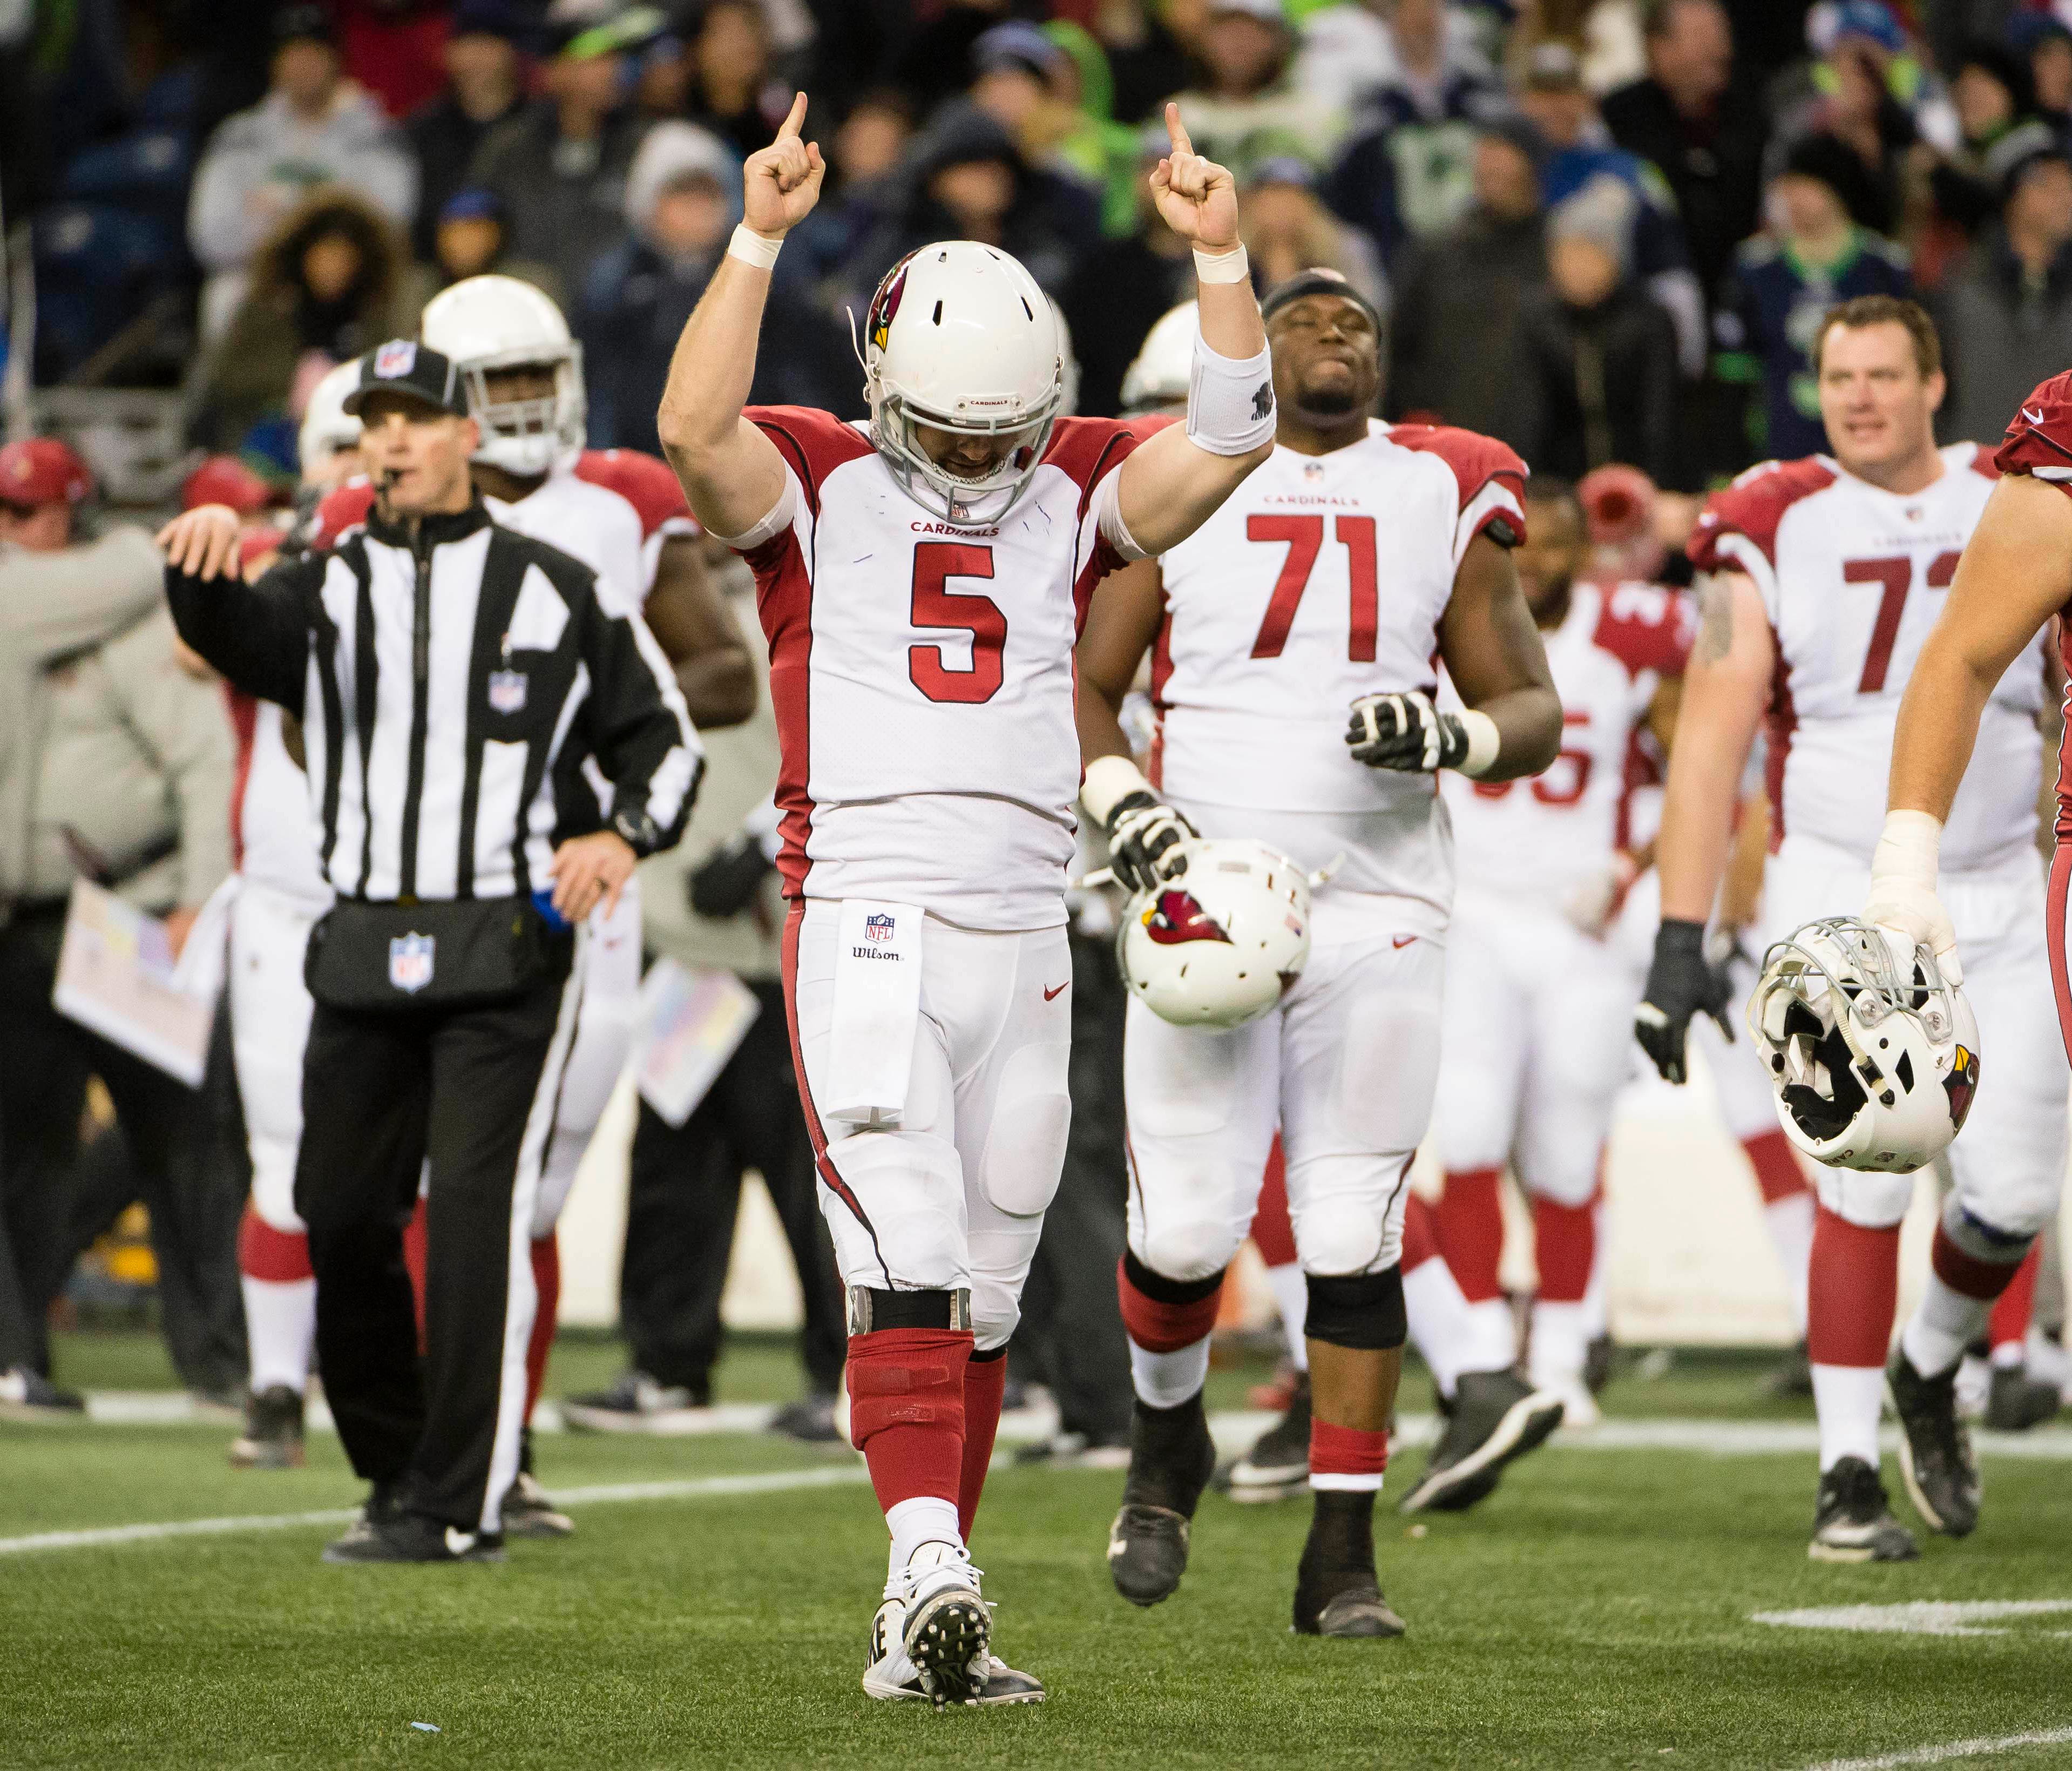 Dec 31, 2017; Seattle, WA, USA; Arizona Cardinals quarterback Drew Stanton (5) celebrates after the Seattle Seahawks missed a field goal during the second half during a game at CenturyLink Field. The Cardinals won 26-24. Mandatory Credit: Troy Wayryn